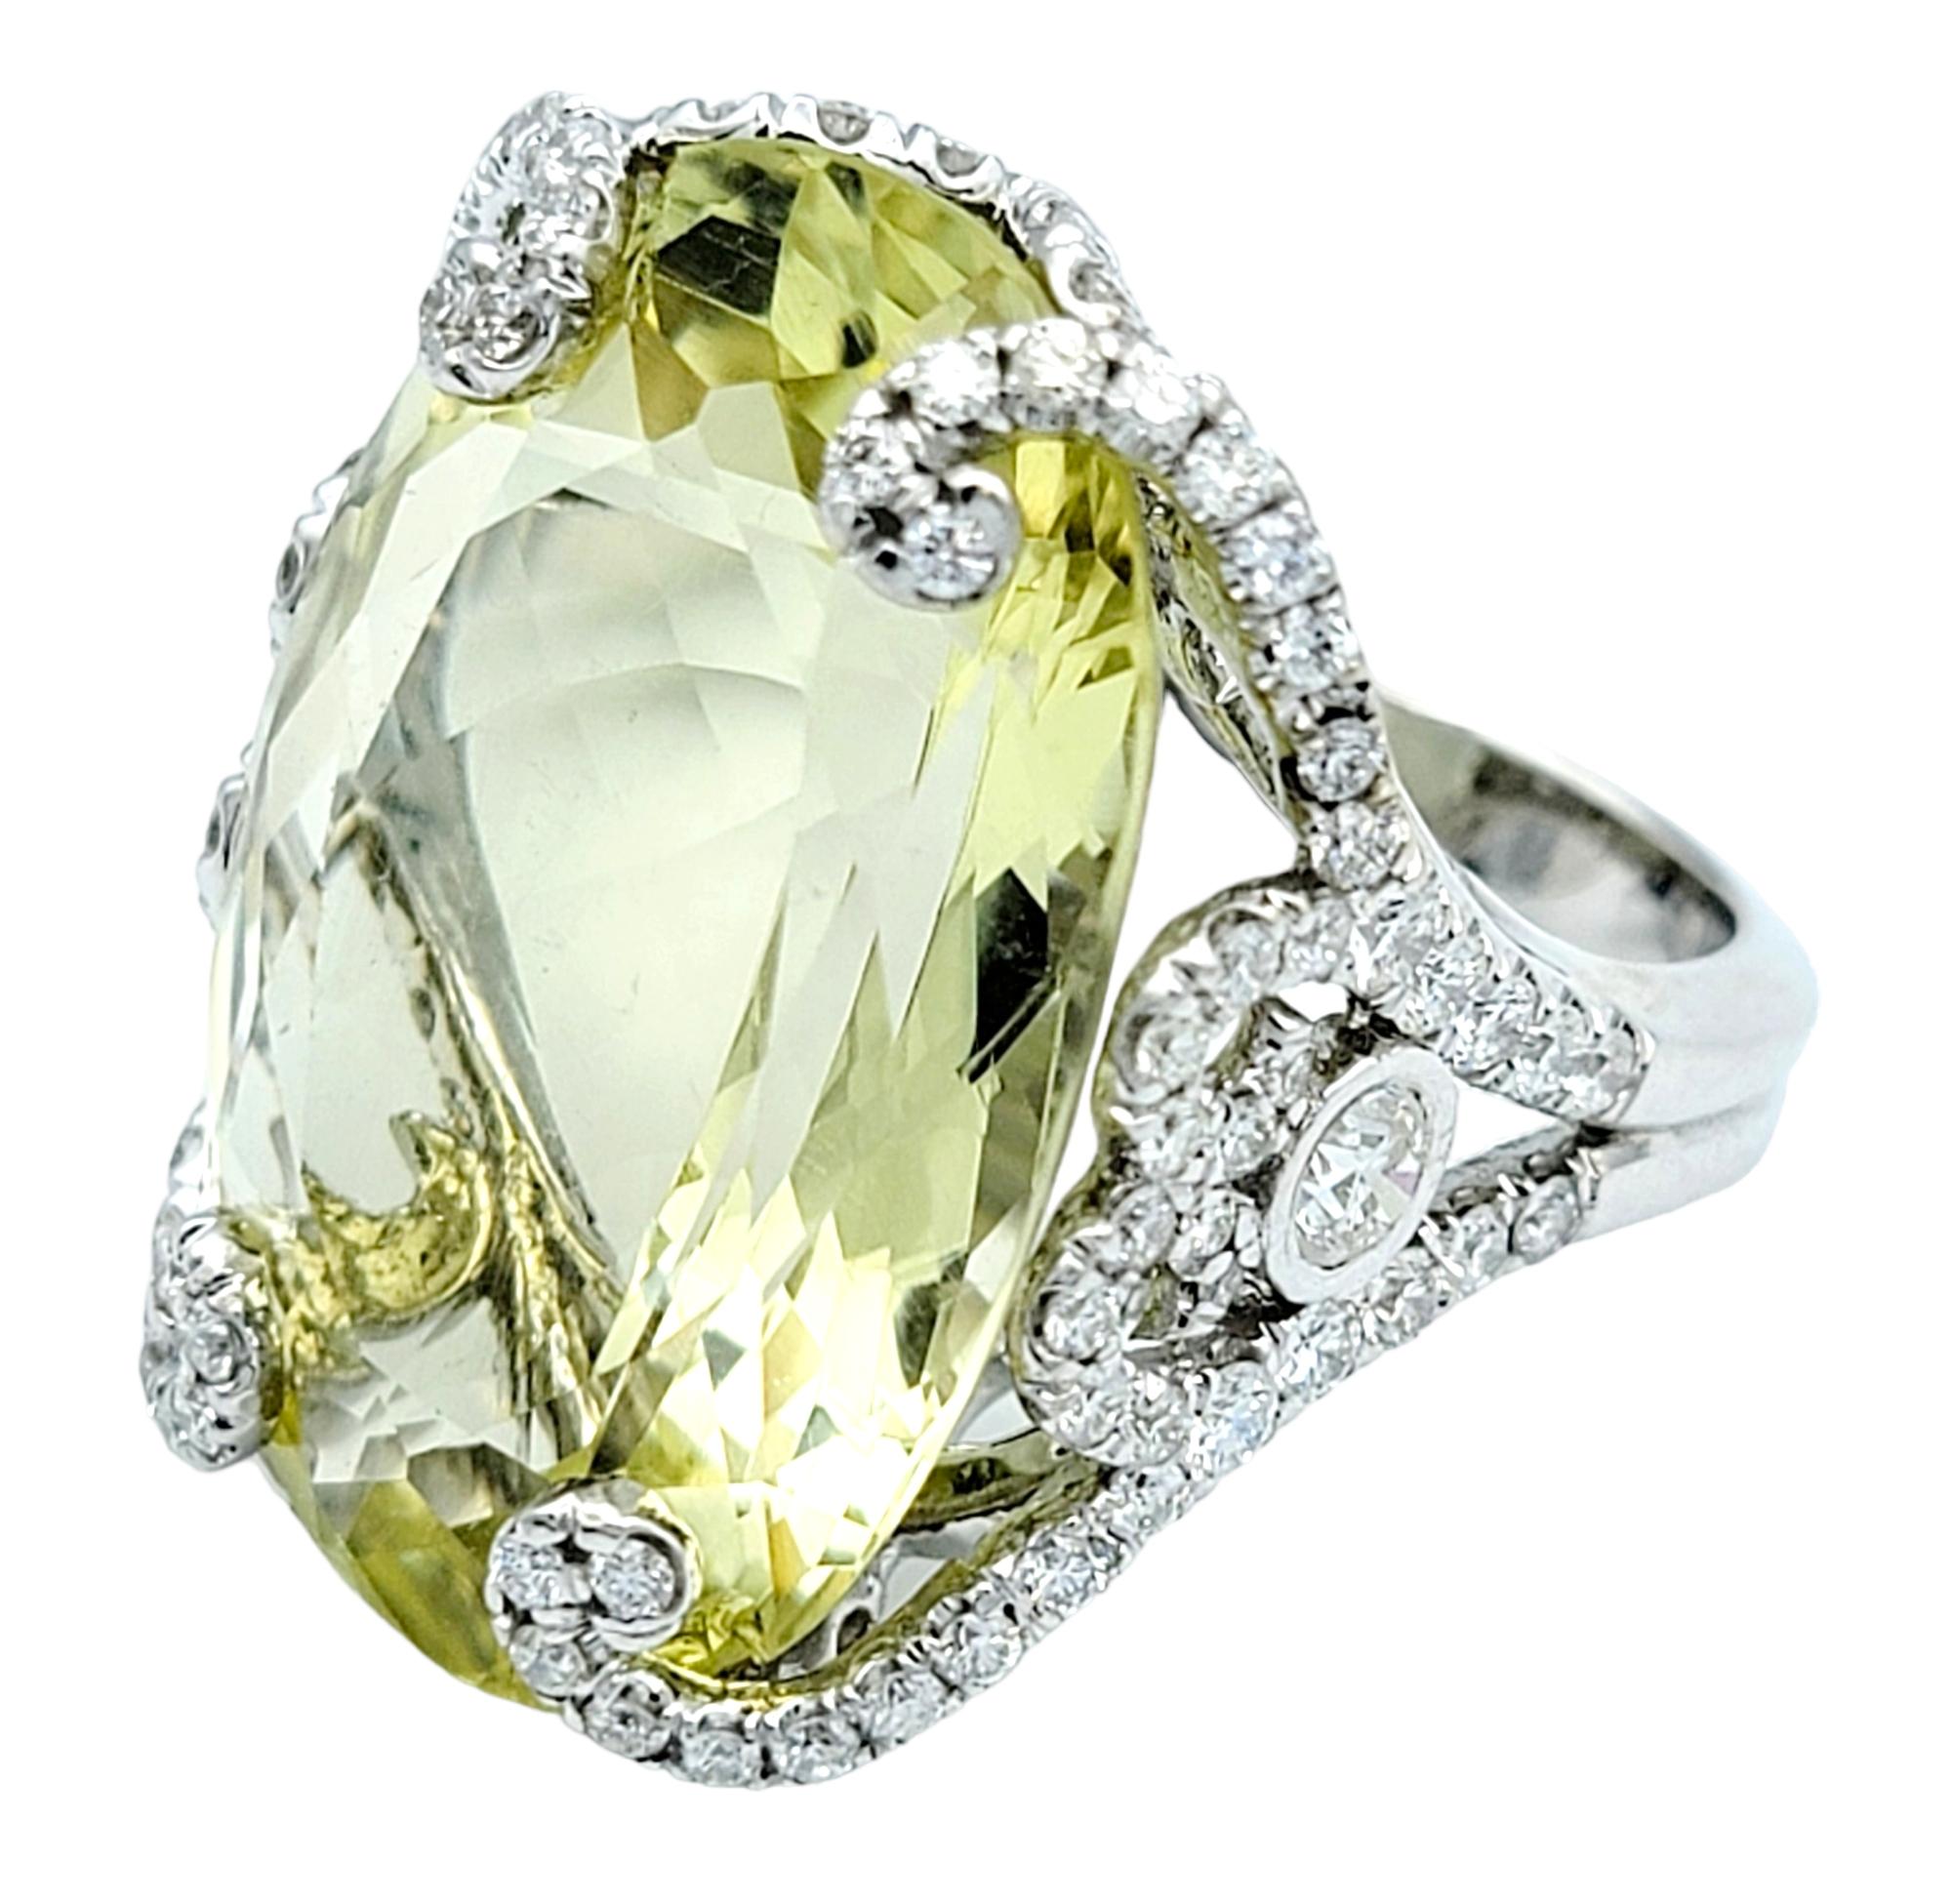 Huge 31.0 Carat Oval Cut Prasiolite Cocktail Ring with Diamond Accents 14K Gold In Good Condition For Sale In Scottsdale, AZ